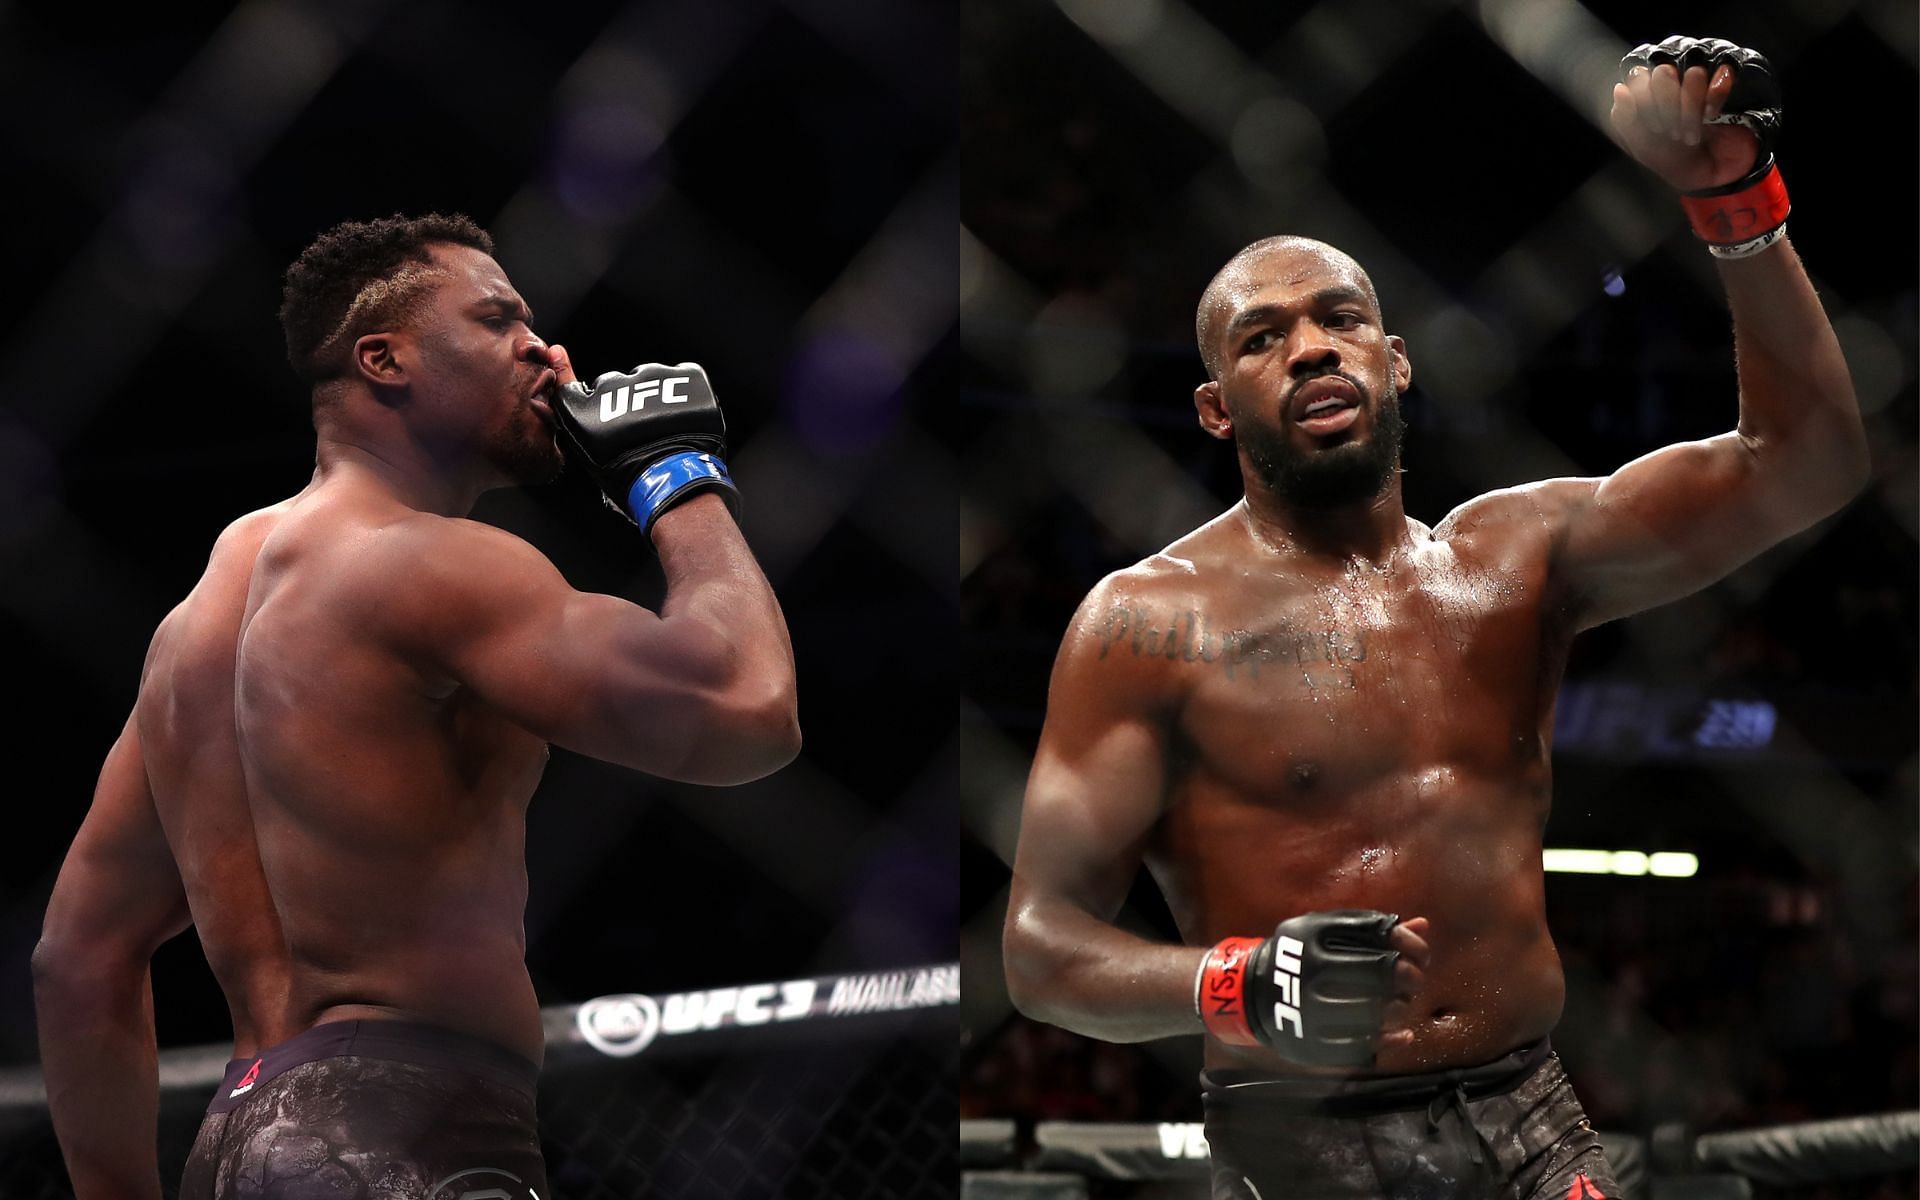 Francis Ngannou (left) and Jon Jones (right). [via Getty Images]